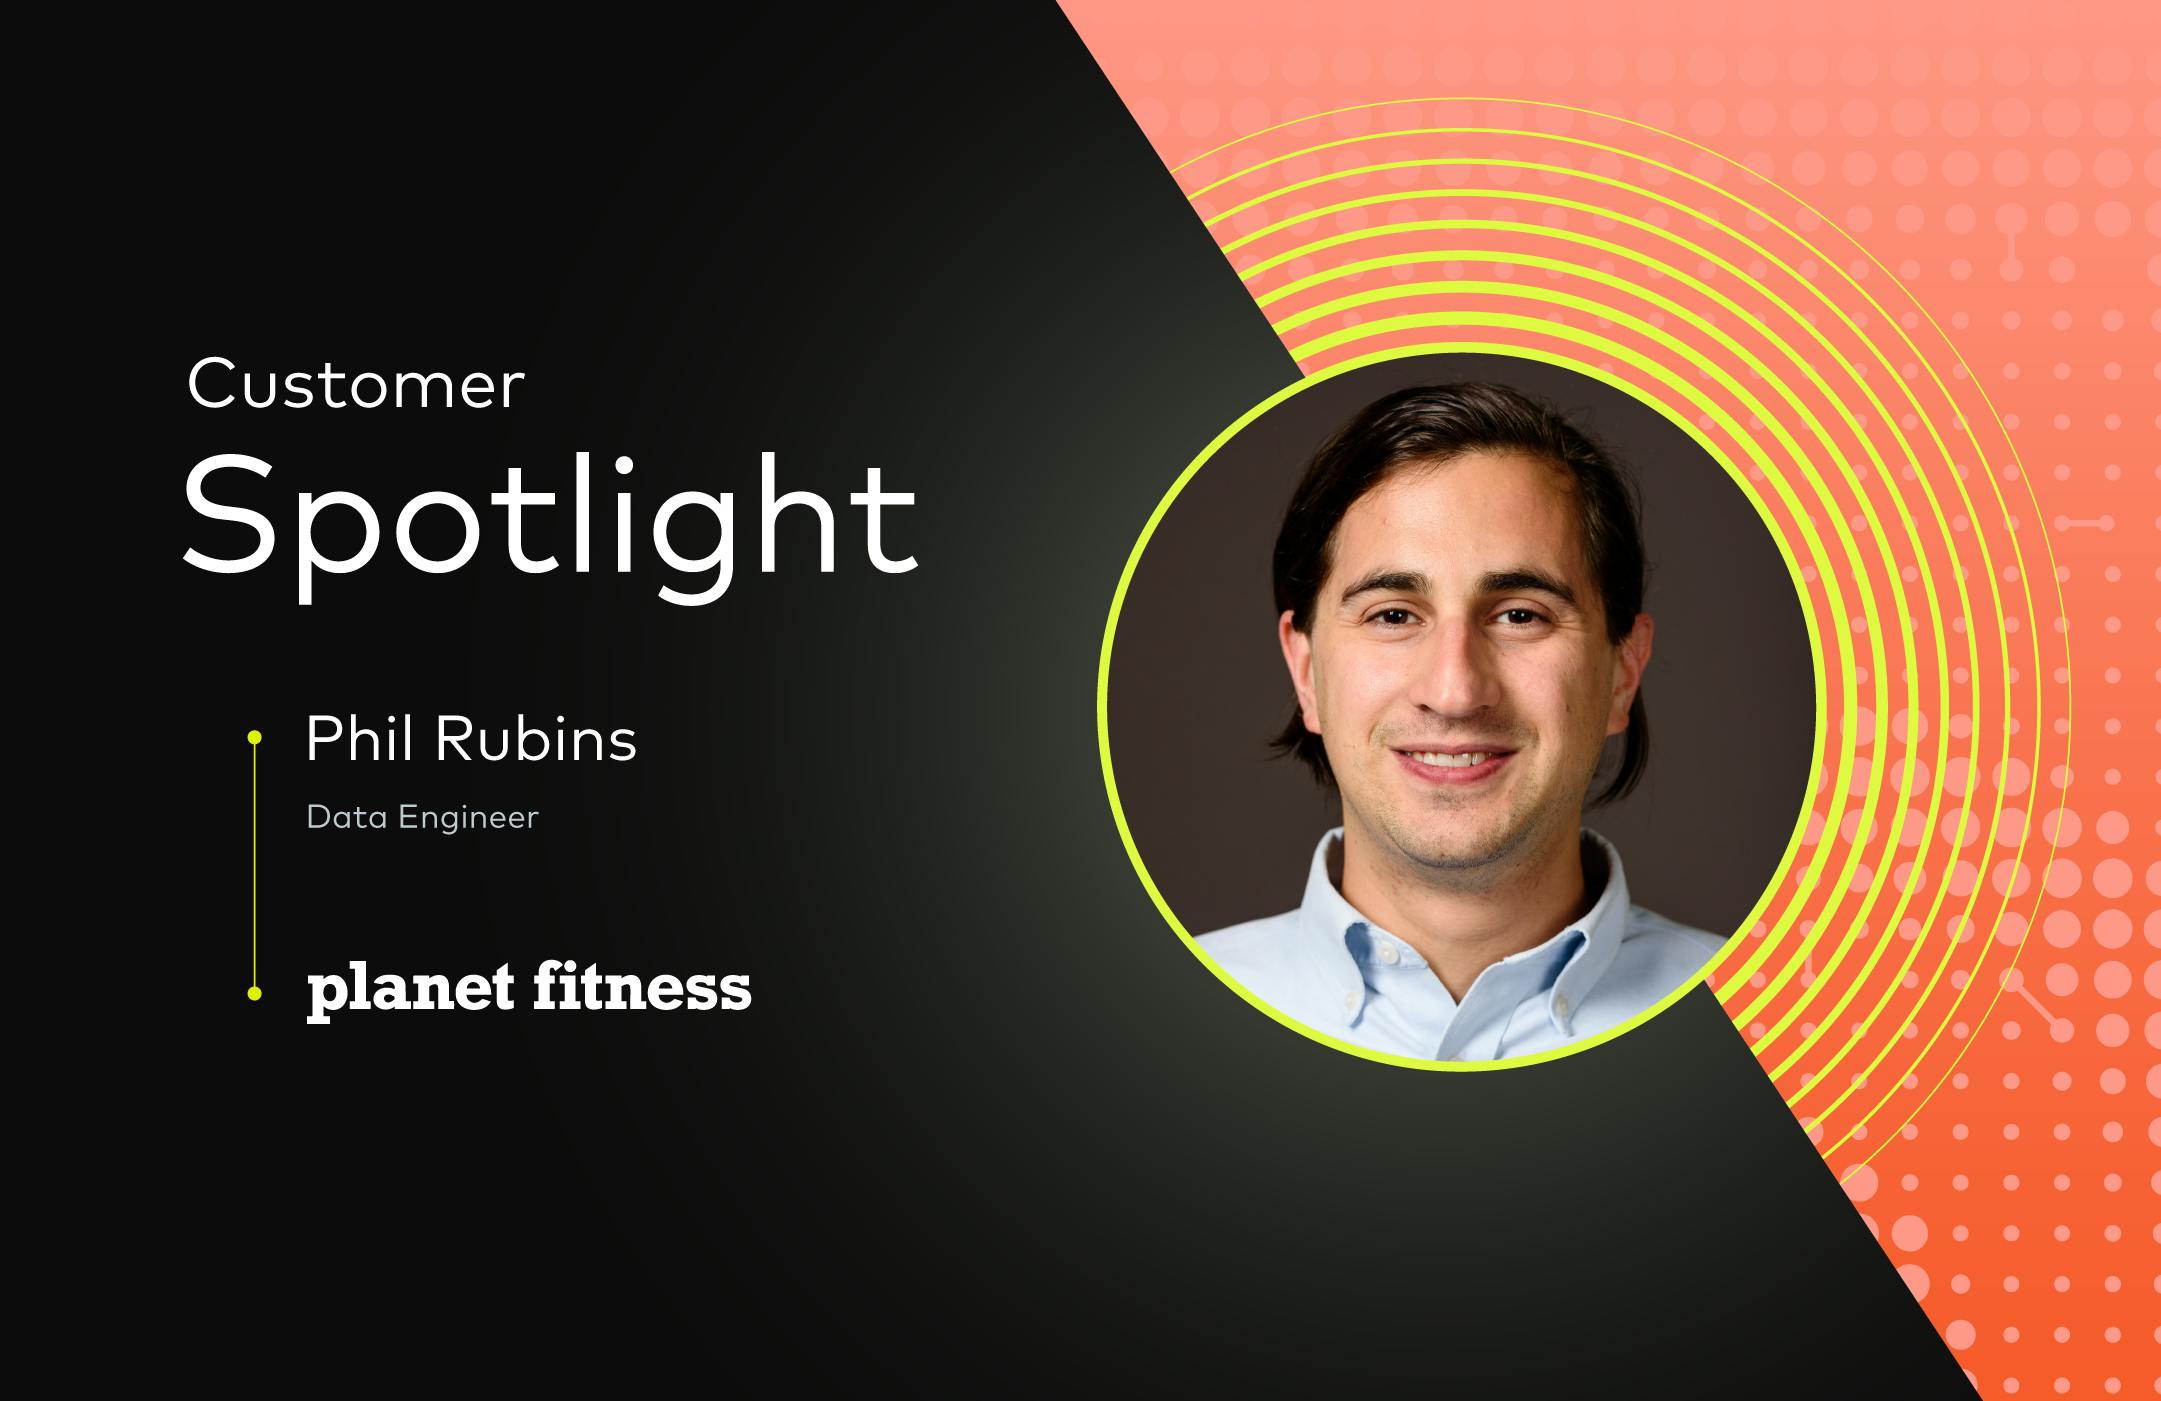 Image showing Phil Rubins with words stating: Customer Spotlight, Phil Rubins. 